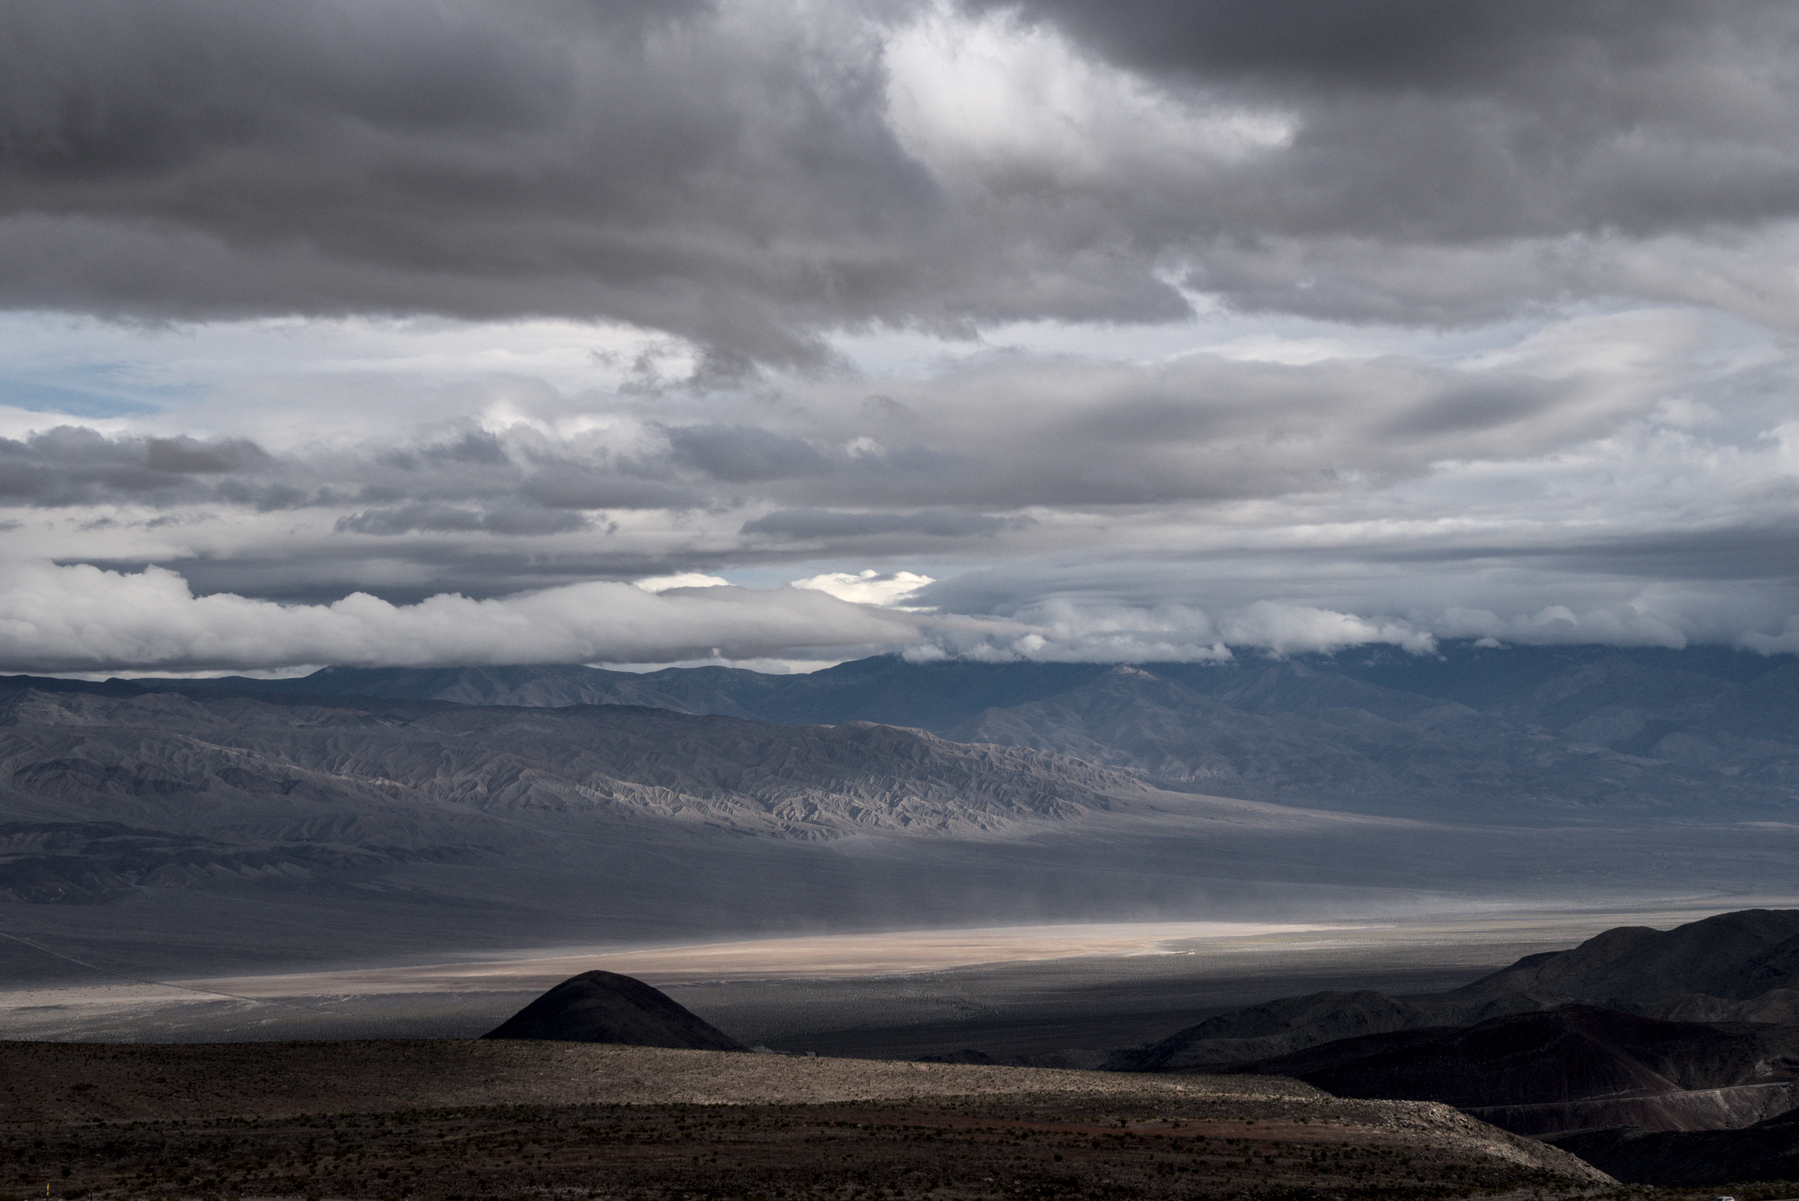 Looking down from a high point, a large, barren valley runs left and rihght. 
 Light hits the bottom of the valley, while the foreground is mostly dark.  Patches of light hit the rugged, eroded mountains on the far side of the valley. Clouds fill the sky, but not uniformly, there are many different types, and patches of blue show through.